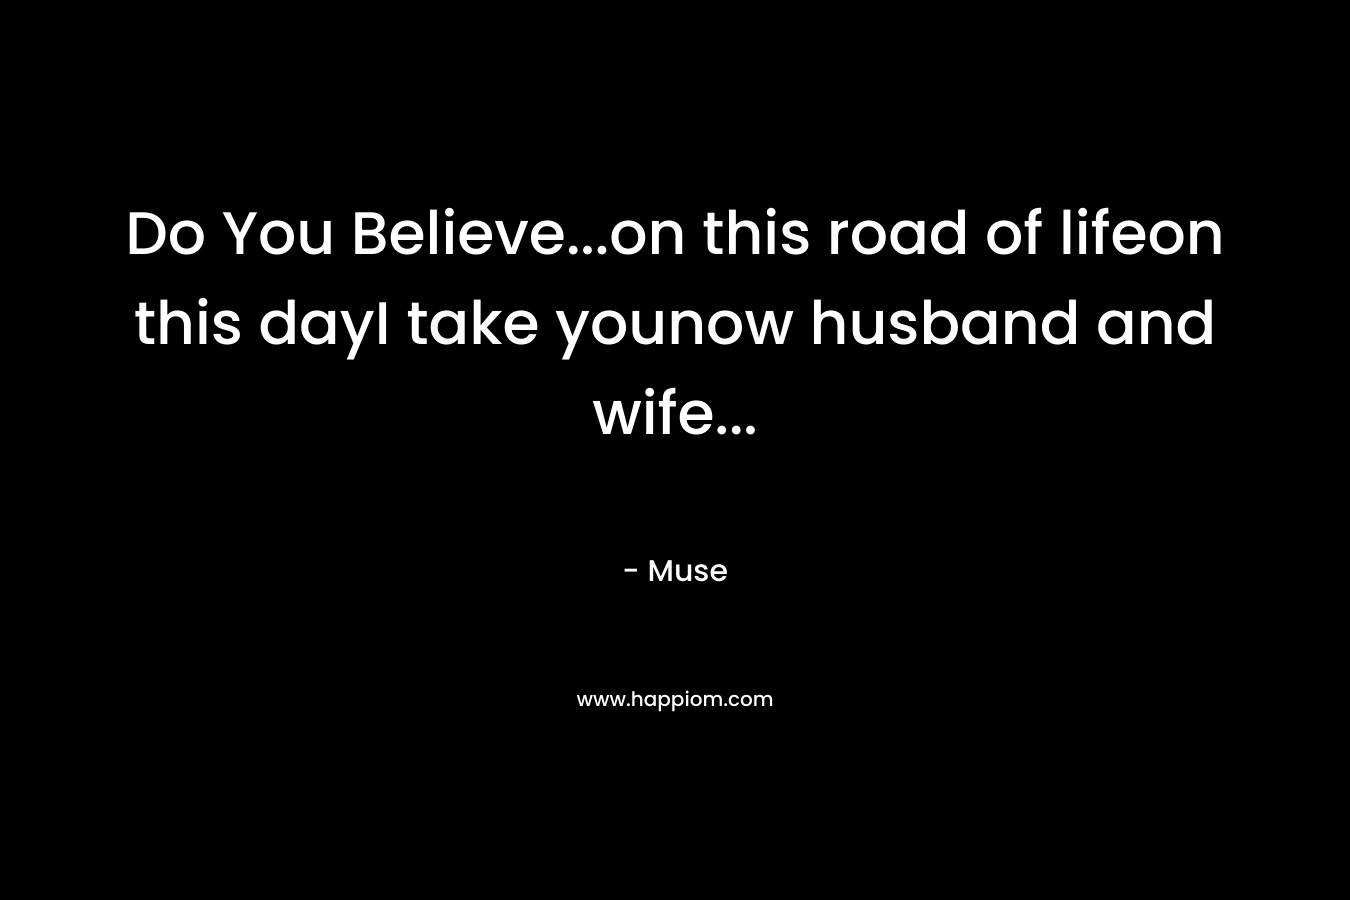 Do You Believe...on this road of lifeon this dayI take younow husband and wife...